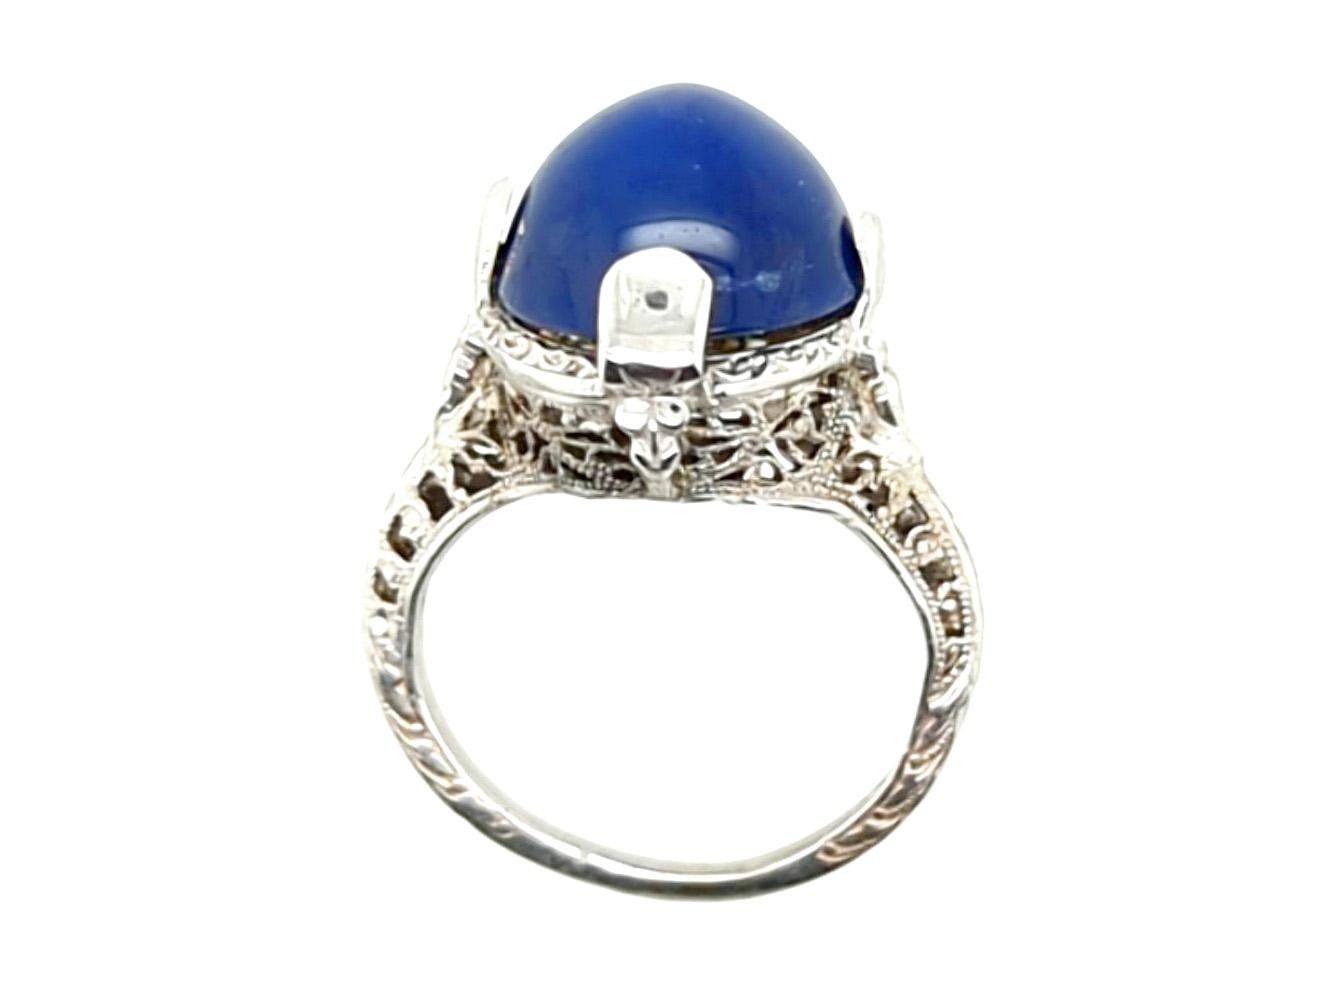 Genuine Original Art Deco Antique from 1930's Blue Linde Star Sapphire Cocktail Ring 18K White Gold 


Featuring a Gorgeous 8.80ct Genuine Oval Cabochon Blue Linde Star Sapphire Center

Finely Engraved Filigree

18K White Gold 

Circa